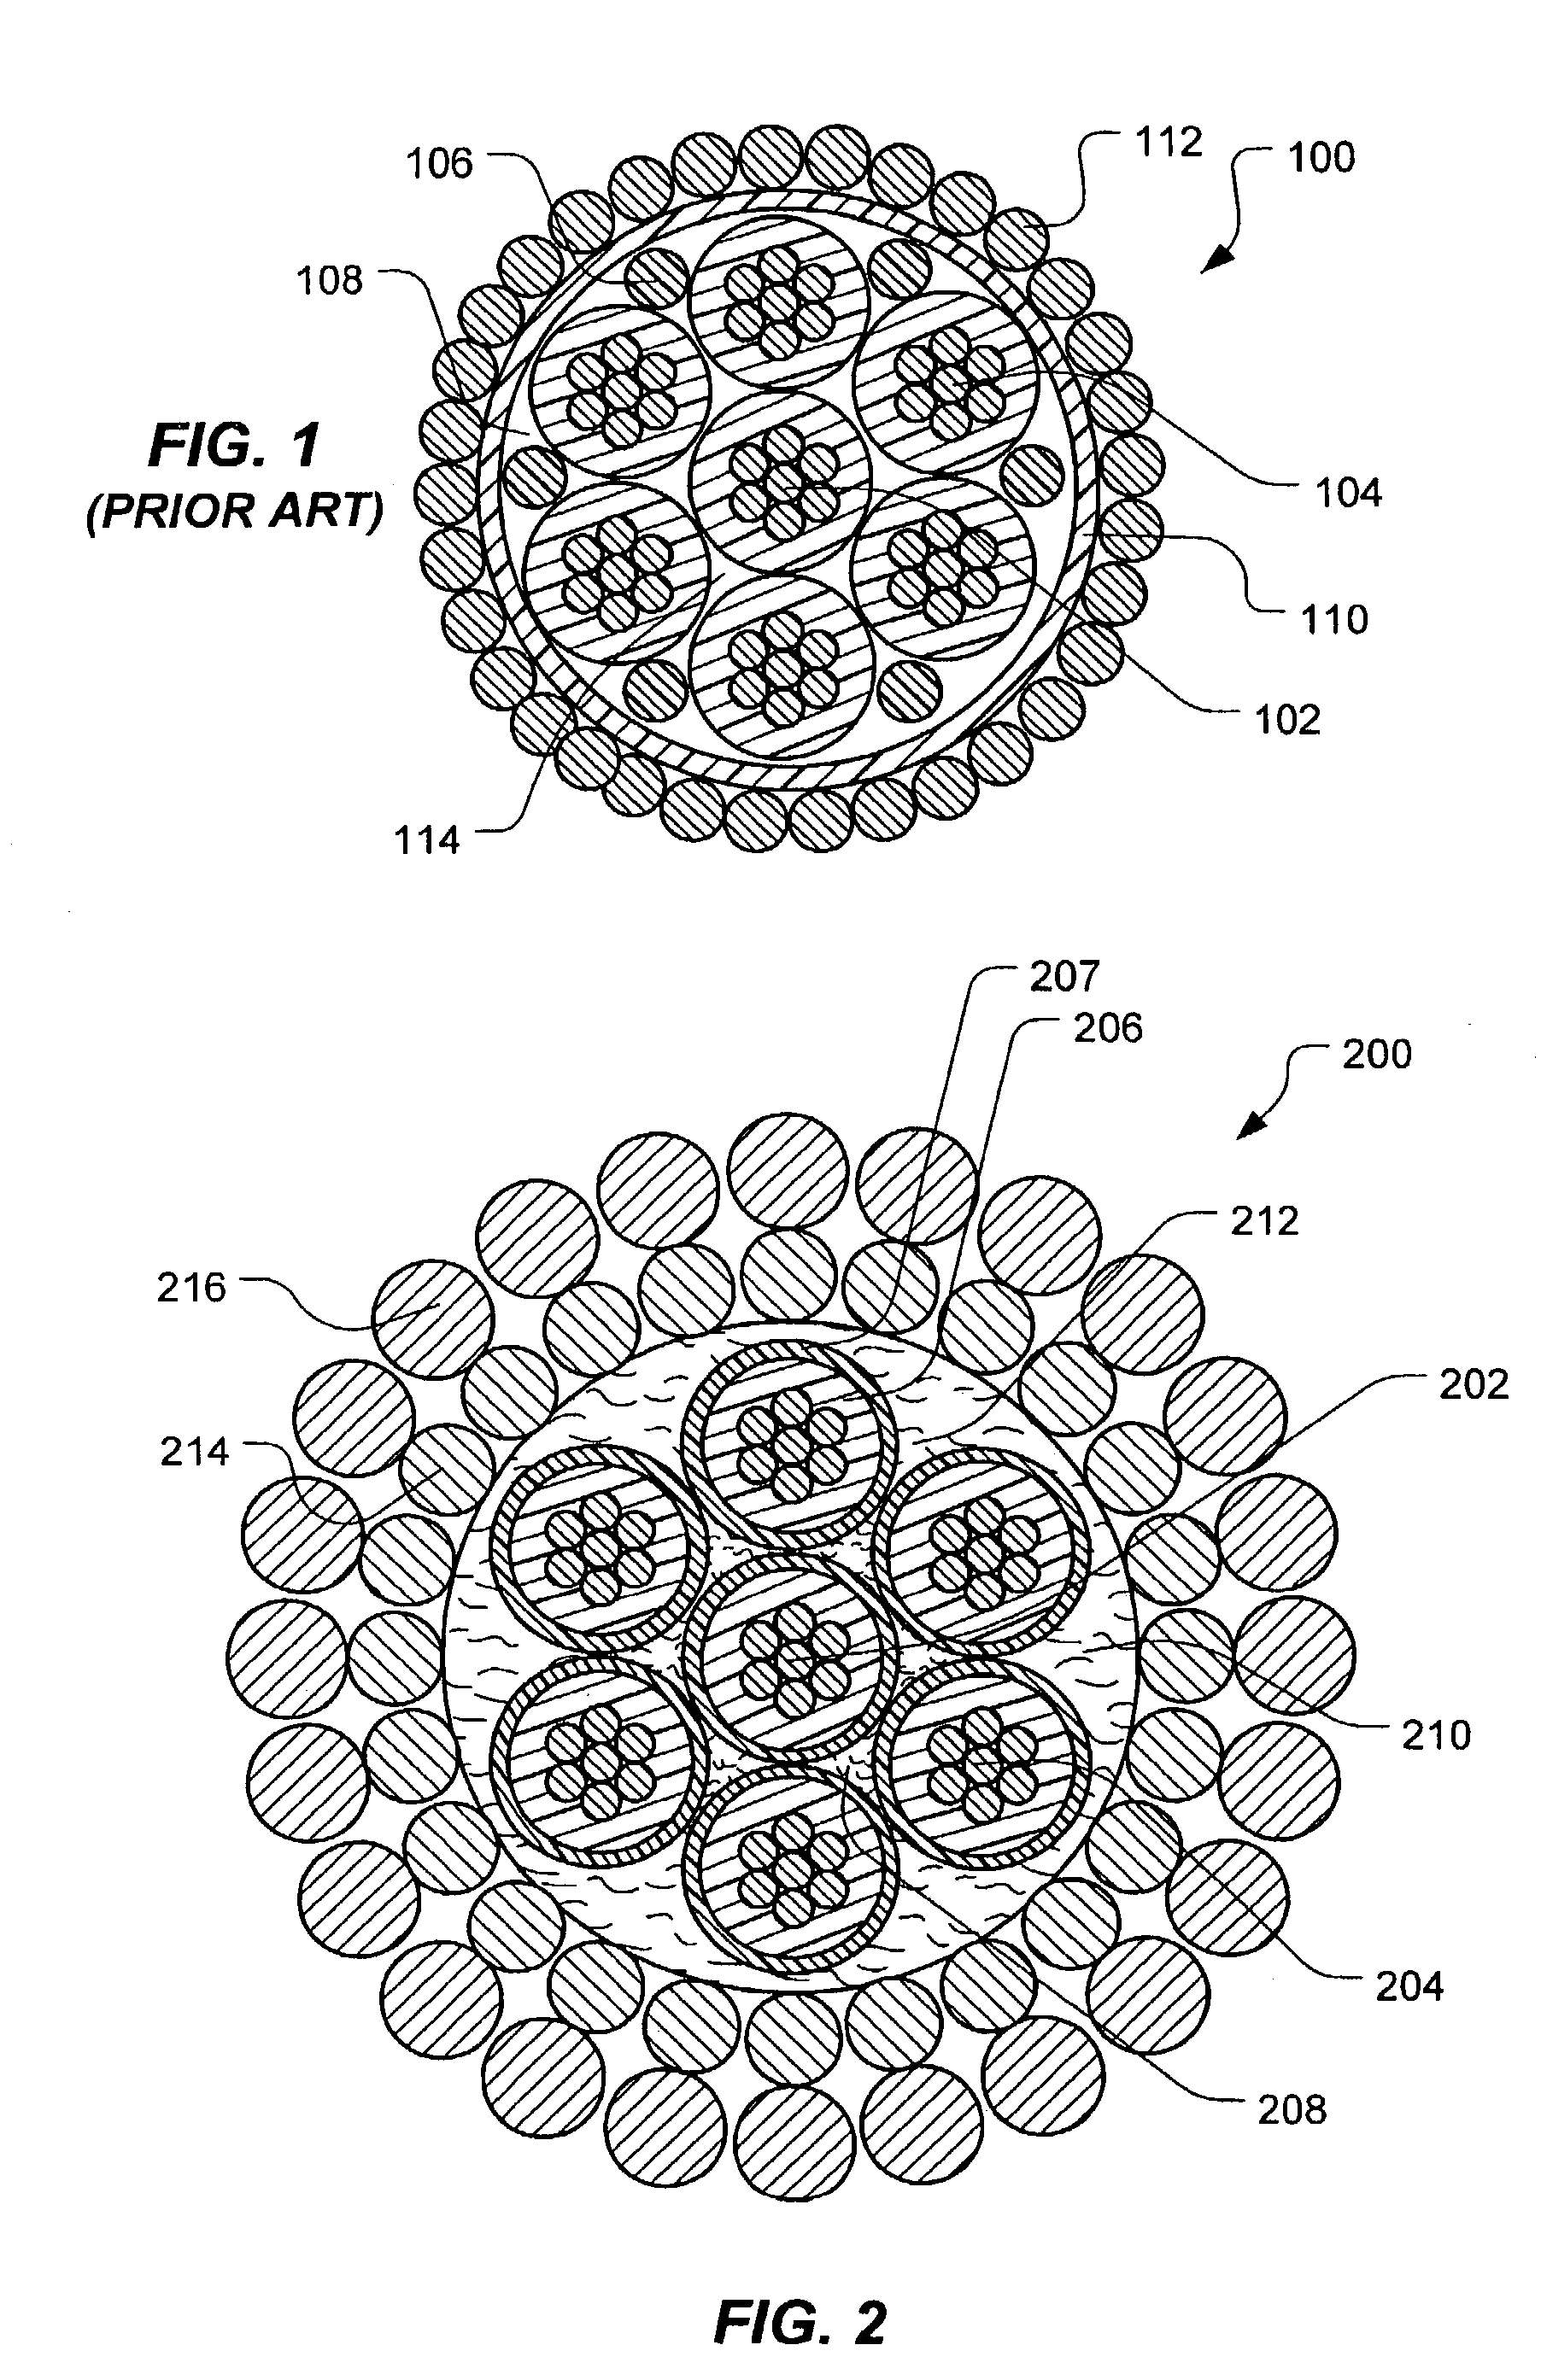 High temperature electrical cable having interstitial filler